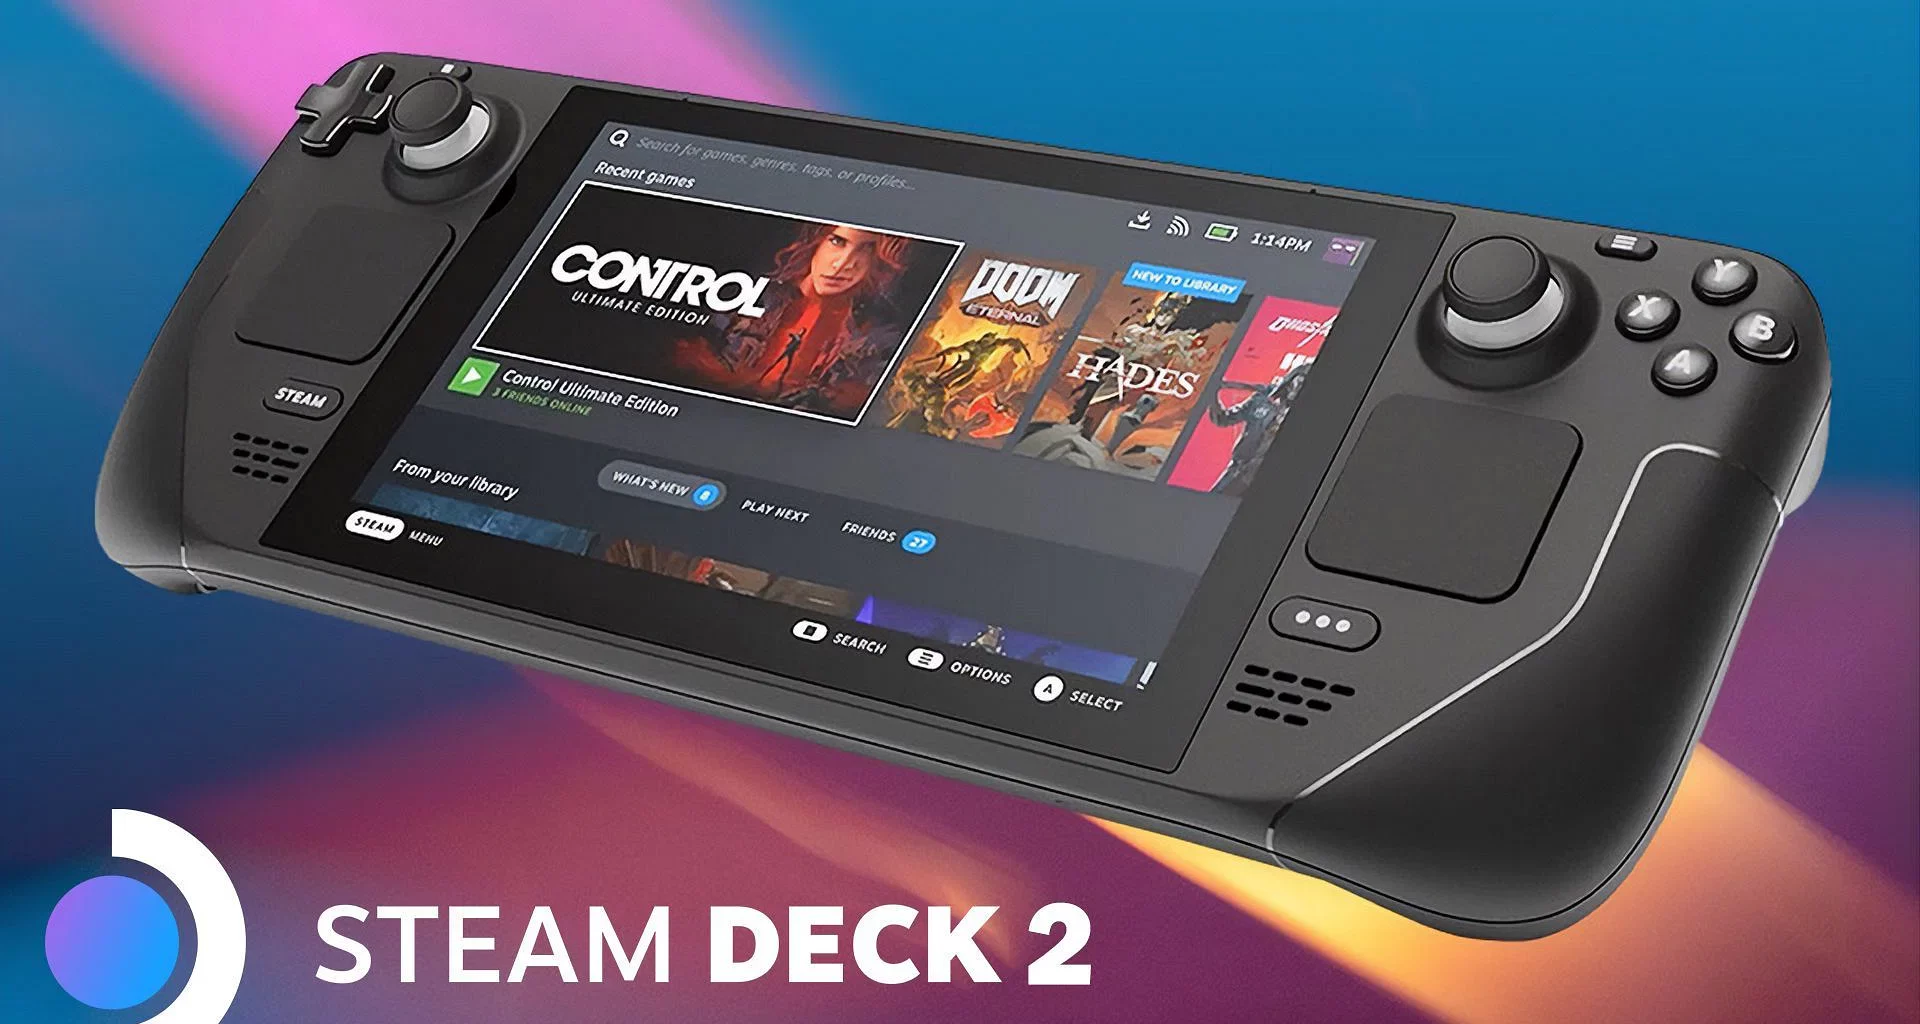 Valve teases Steam Deck 2 with developed specs in latest booklet